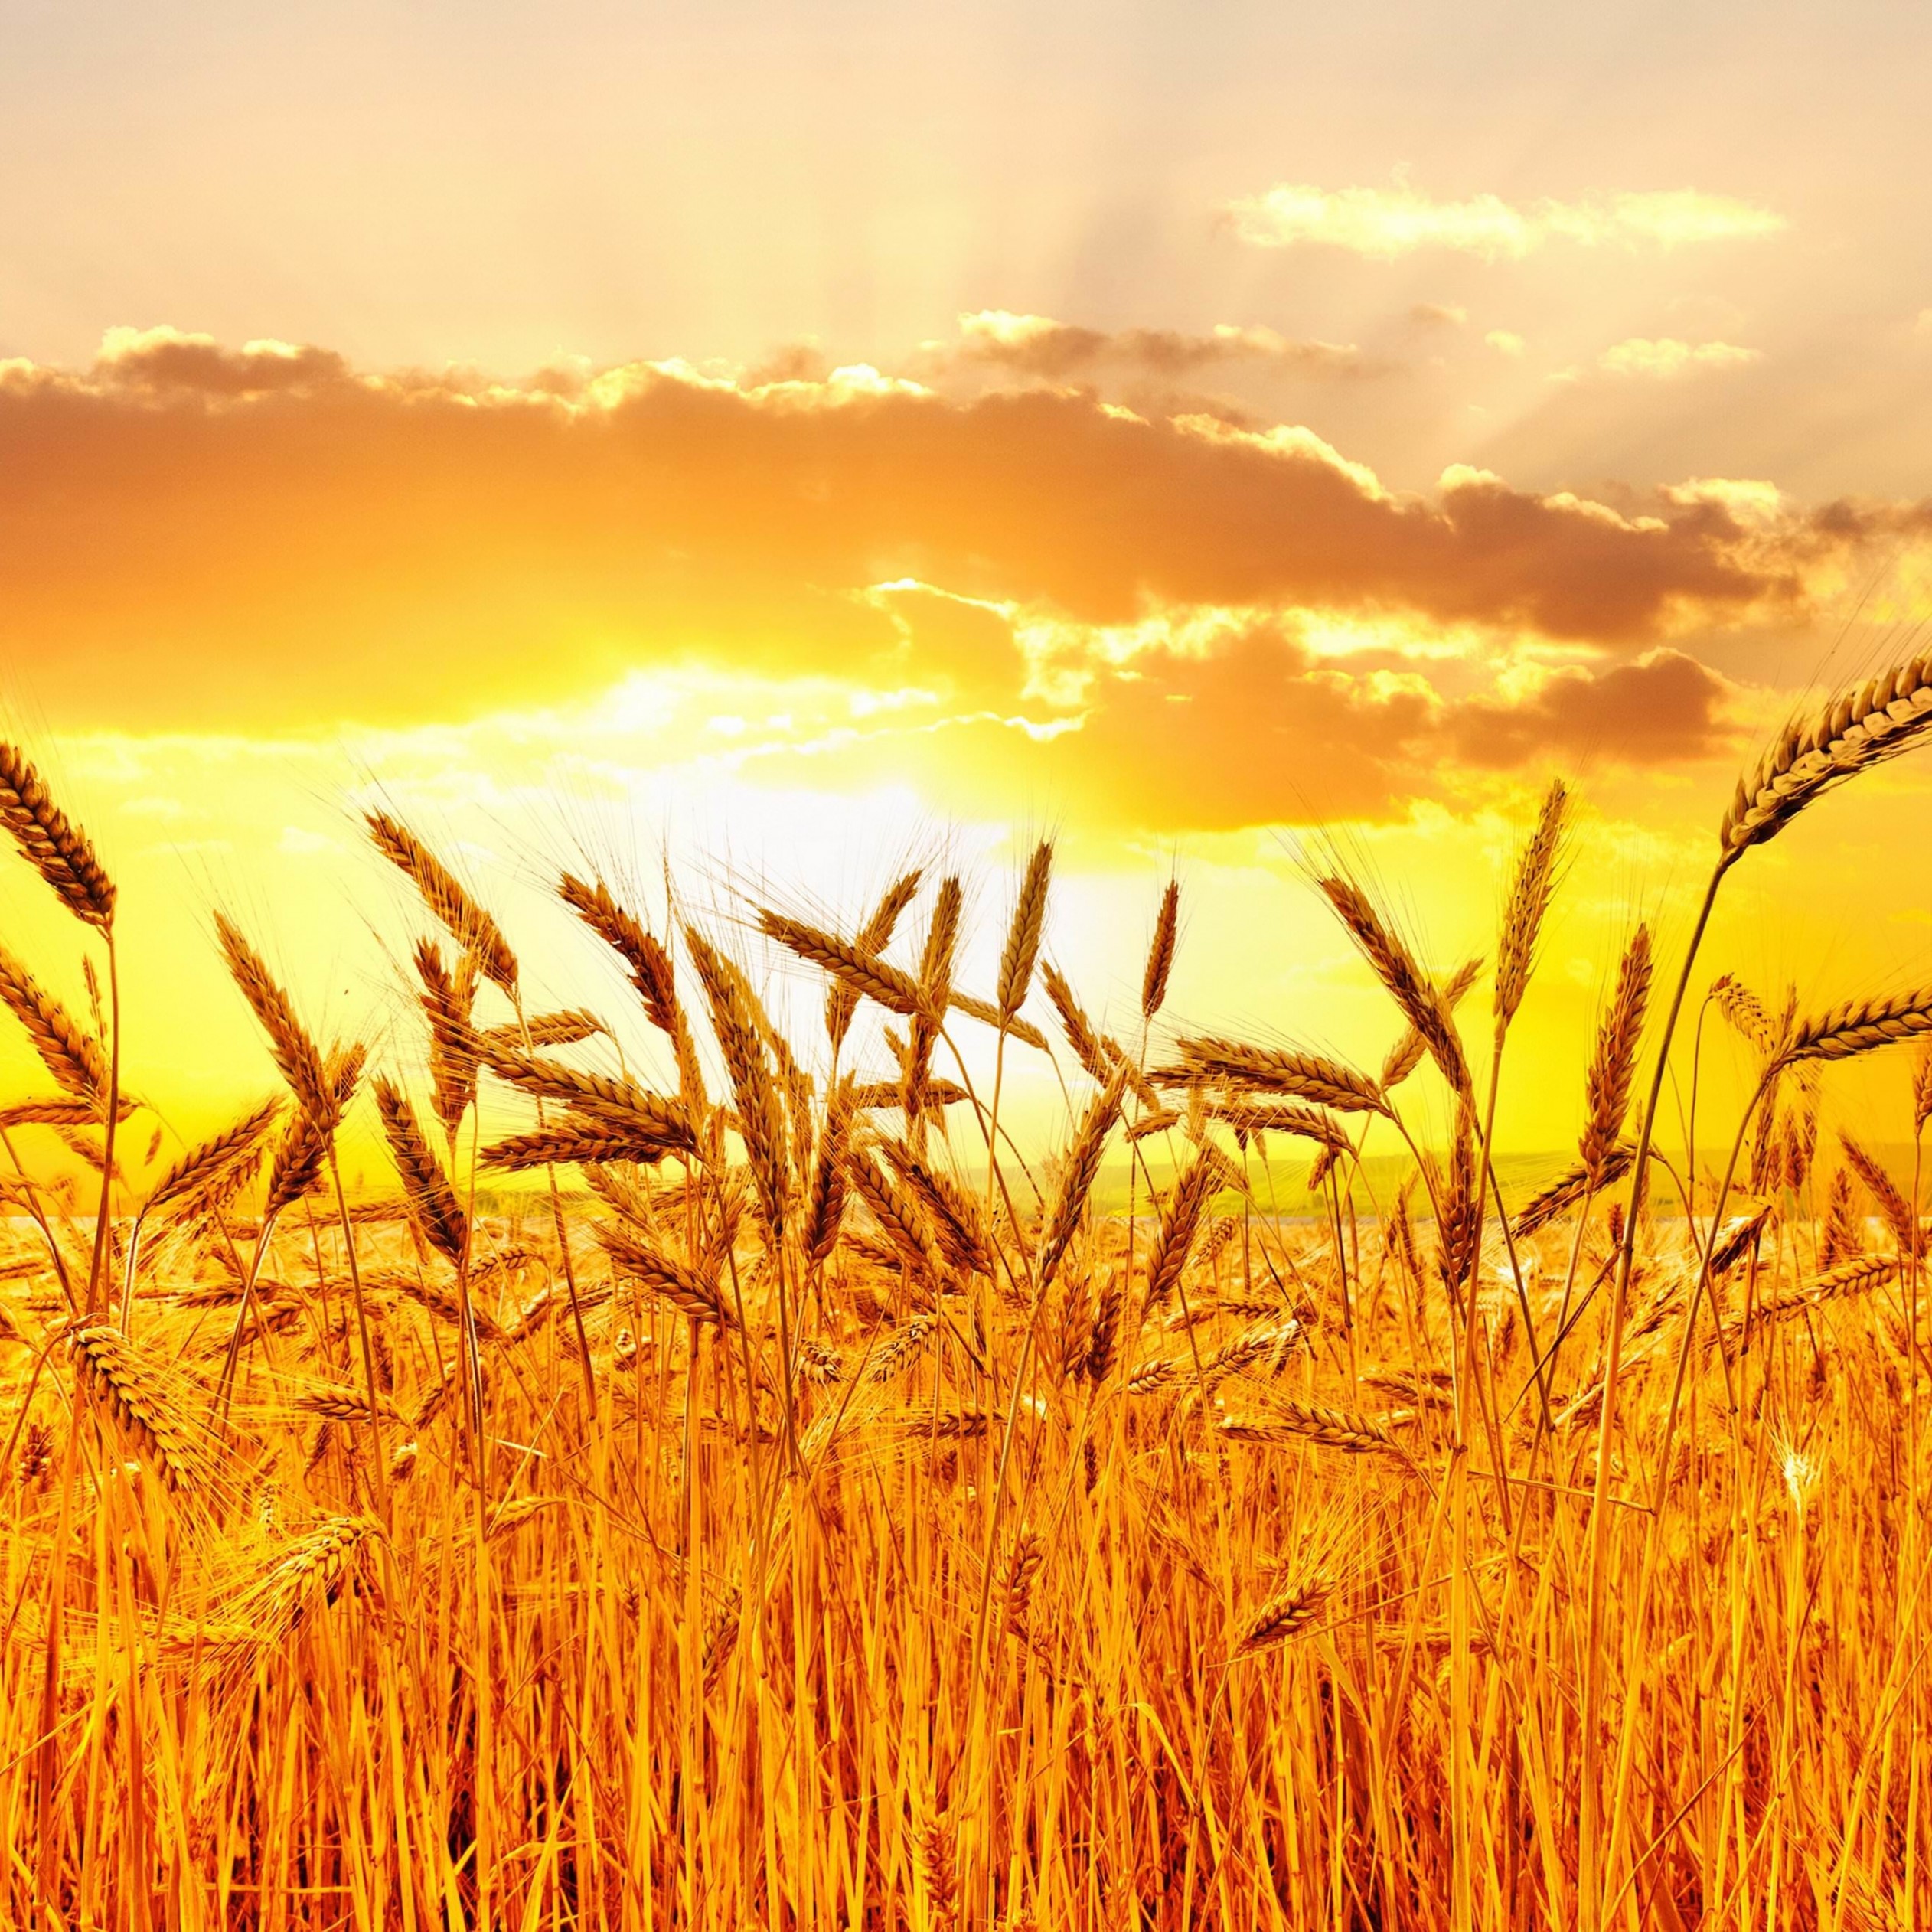 Golden Wheat Field At Sunset Wallpaper for Apple iPad Air